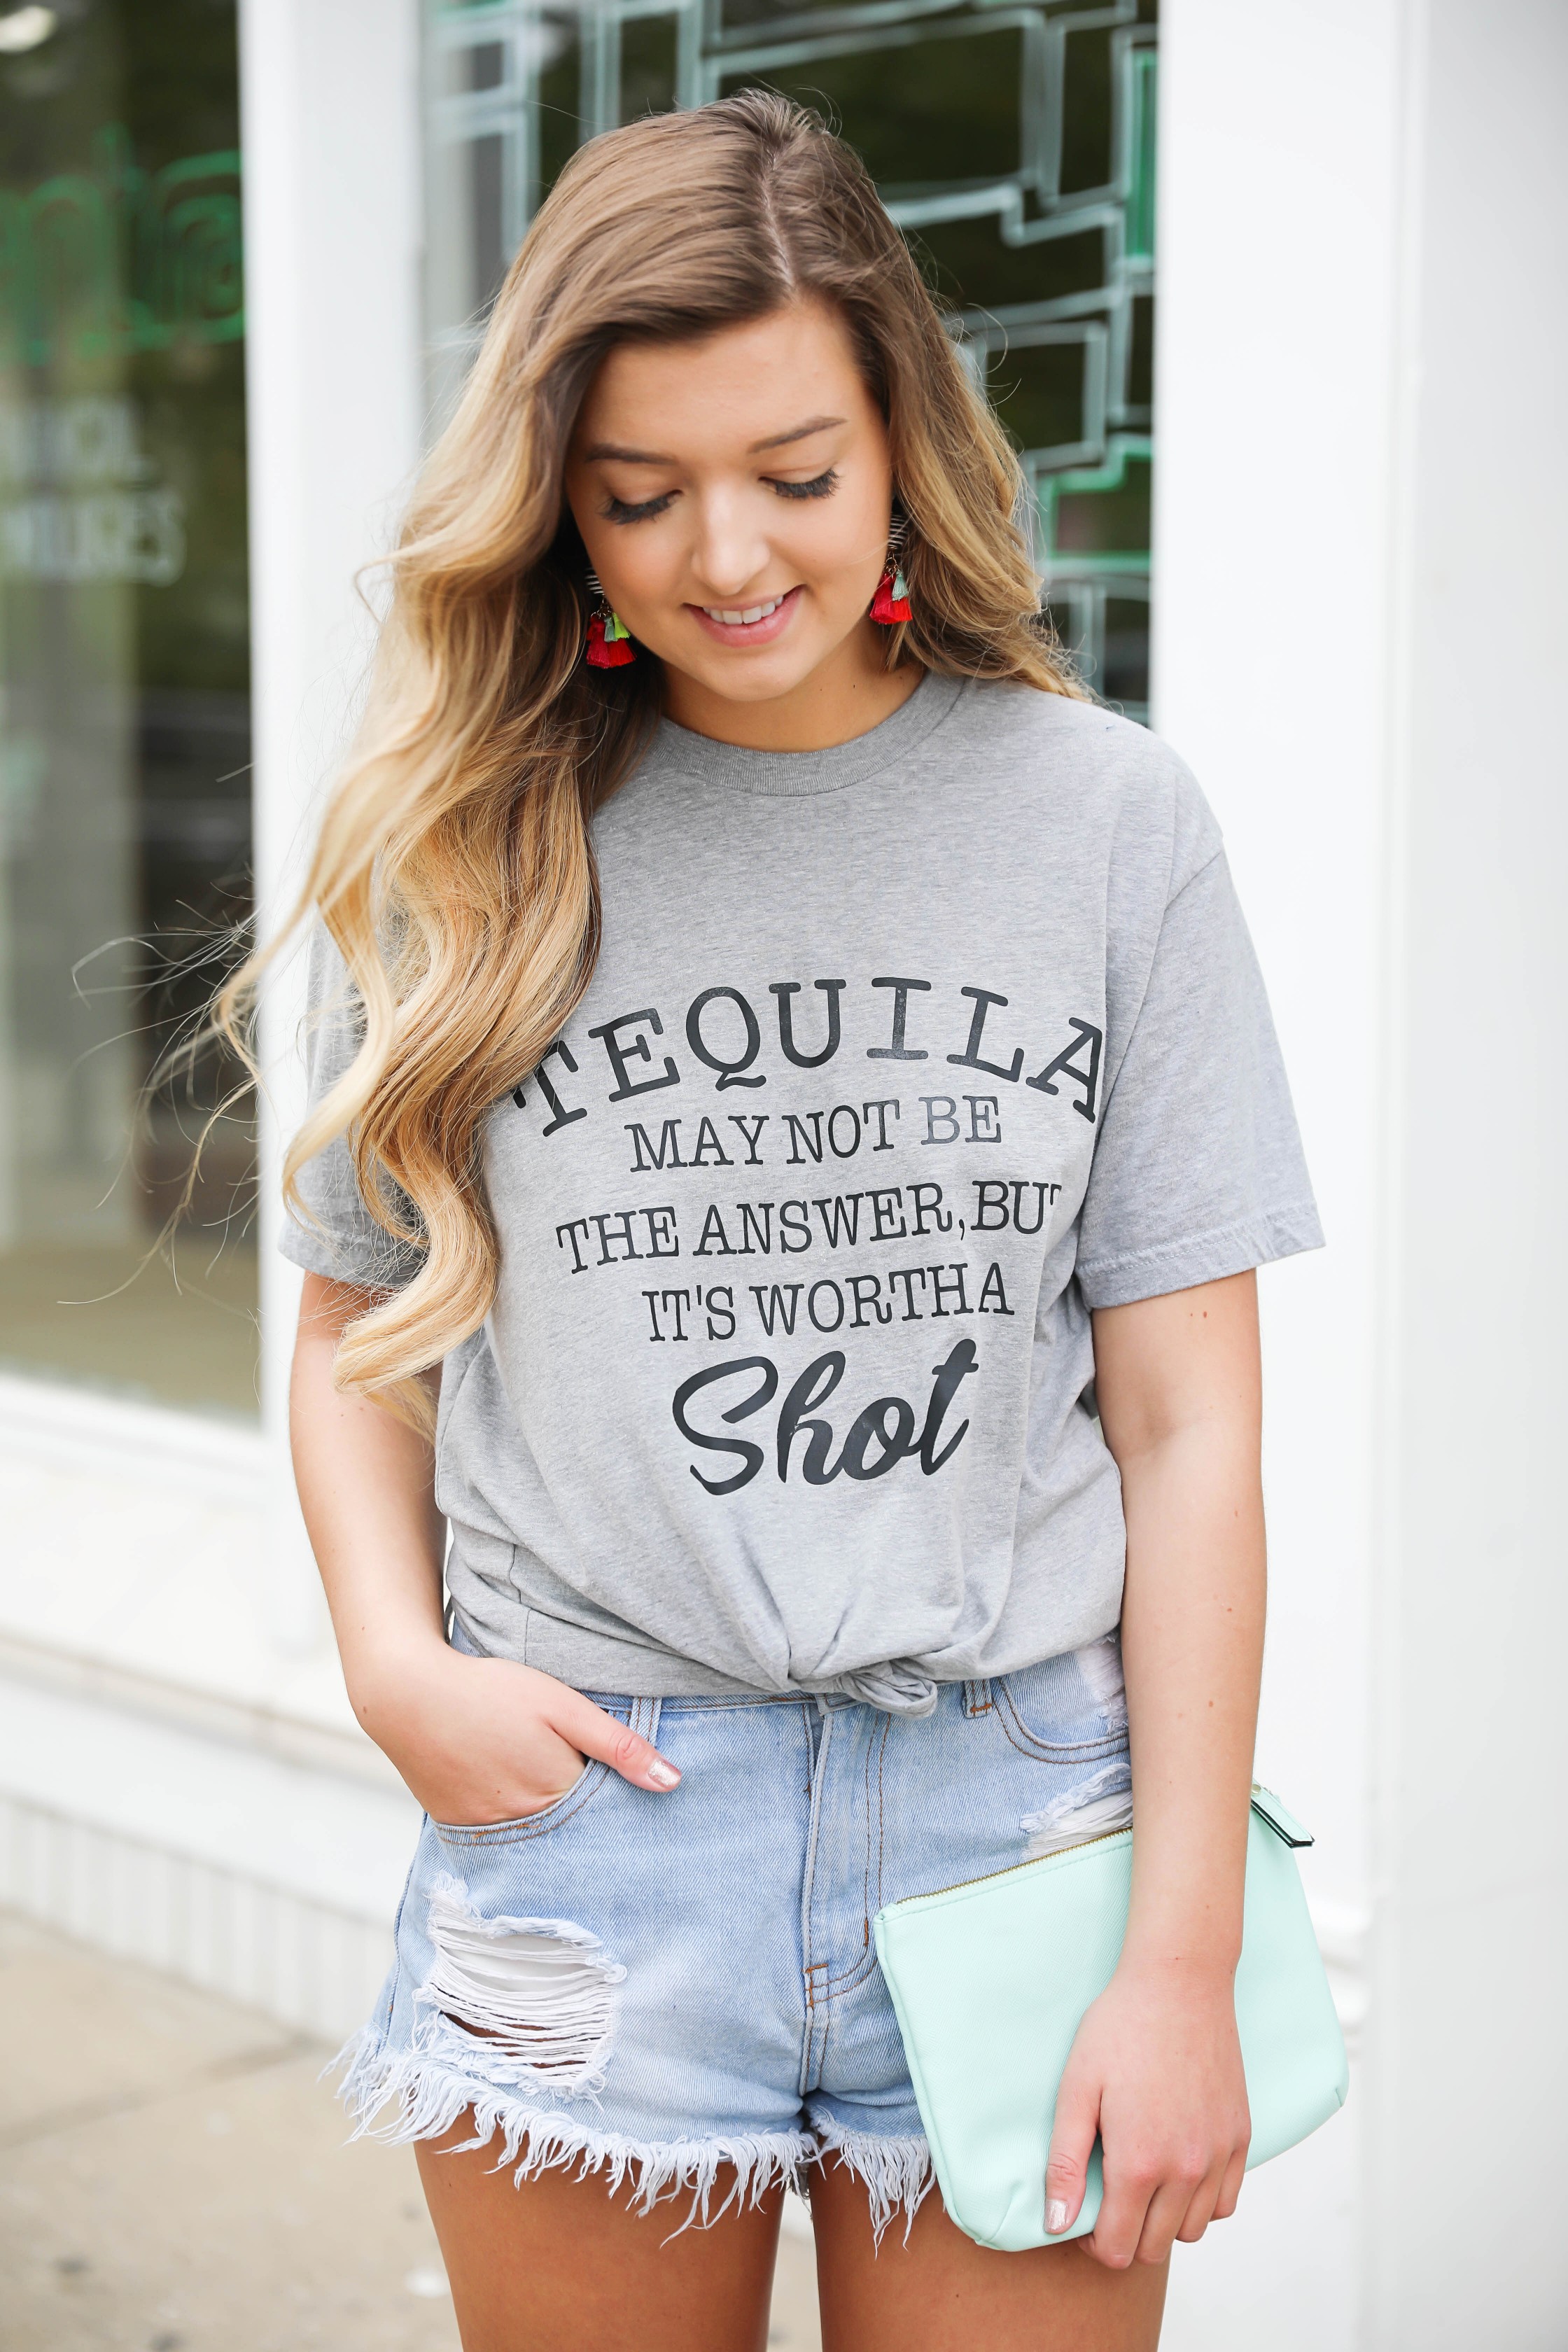 Tequila isn't always the answer, but it's worth a shot! Funny tequila saying tshirt for cinco de mayo! Outfit details on fashion blog daily dose of charm by lauren lindmark